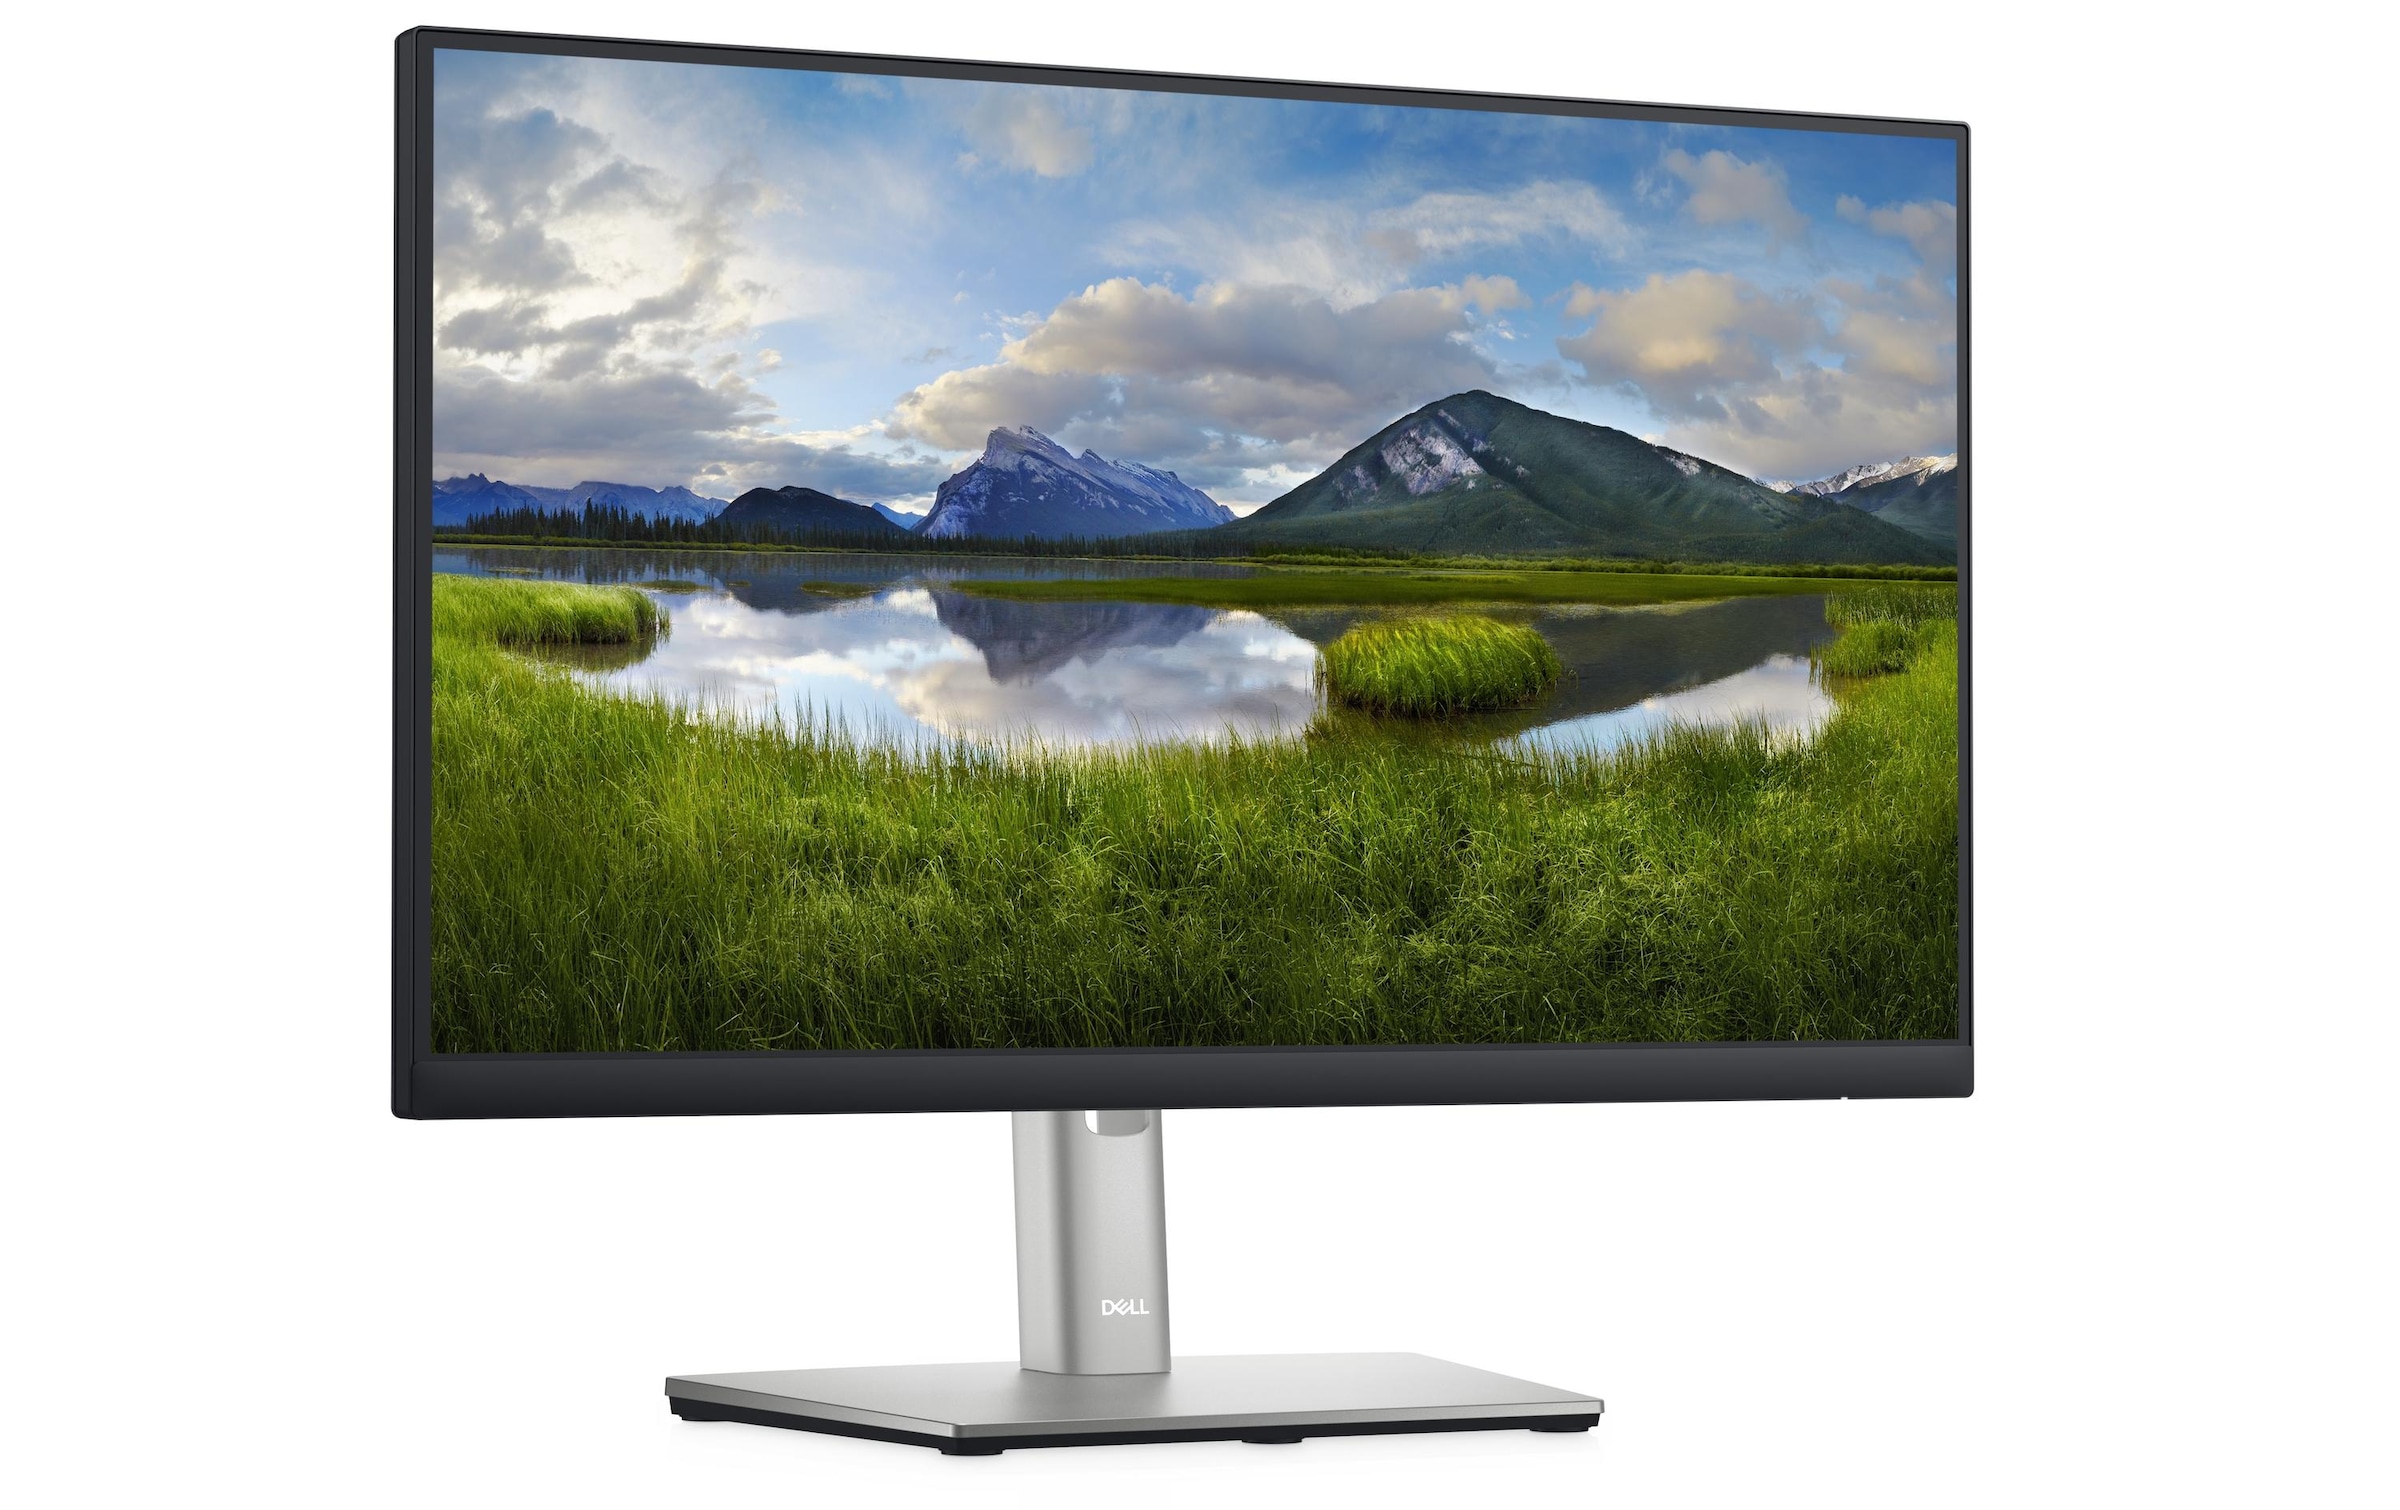 Dell LED-Monitor »P2222H«, 54,61 cm/21,5 Zoll, 1920 x 1080 px, 60 Hz